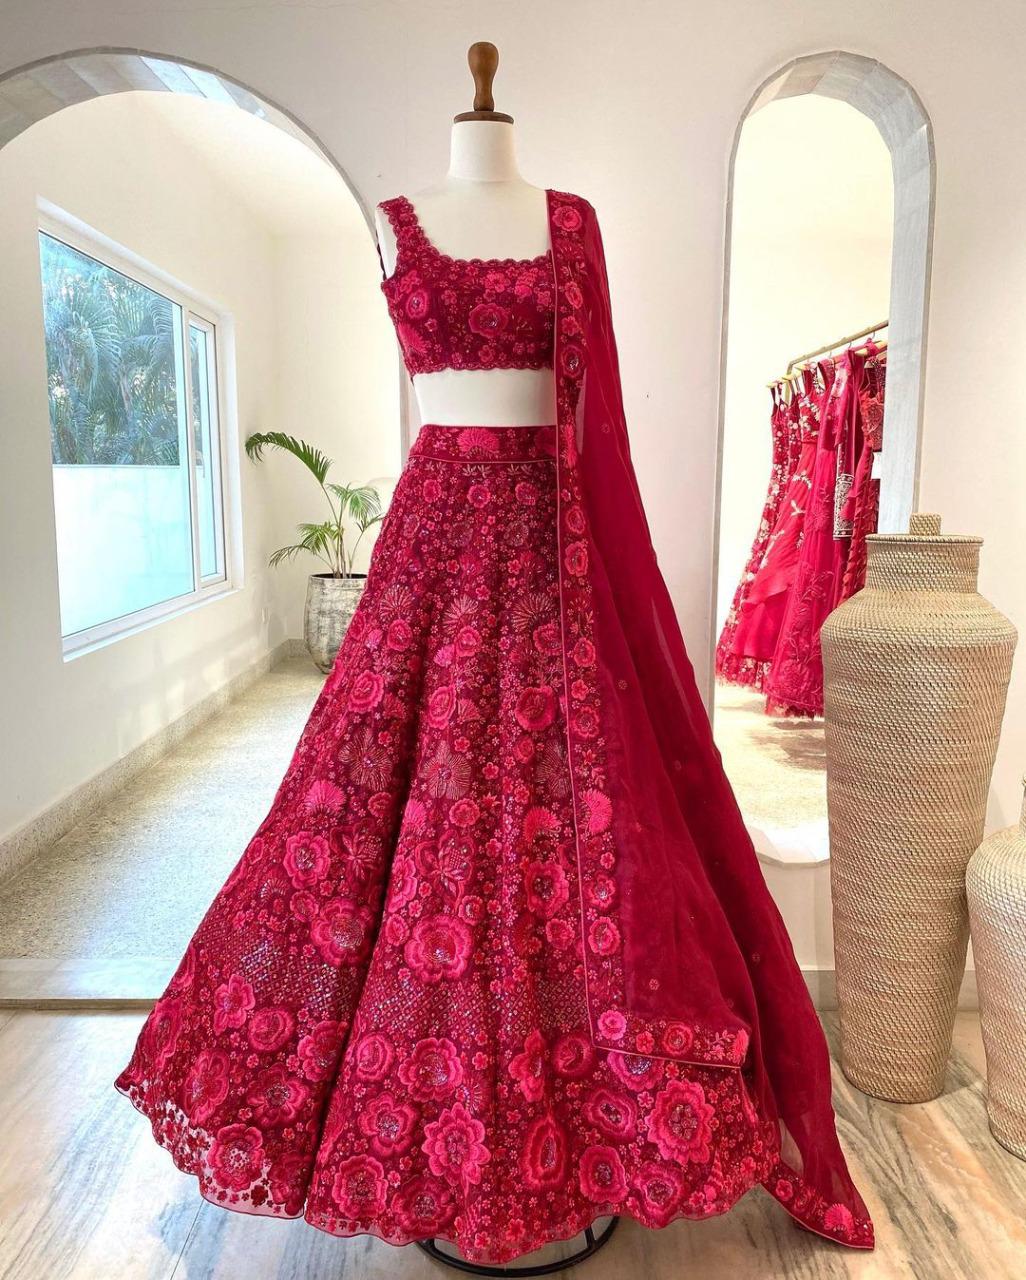 The Best Bridal Wear Stores In Juhu, Mumbai To Check Out For Your Wedding  Shopping! *High-End To Budget! | WedMeGood